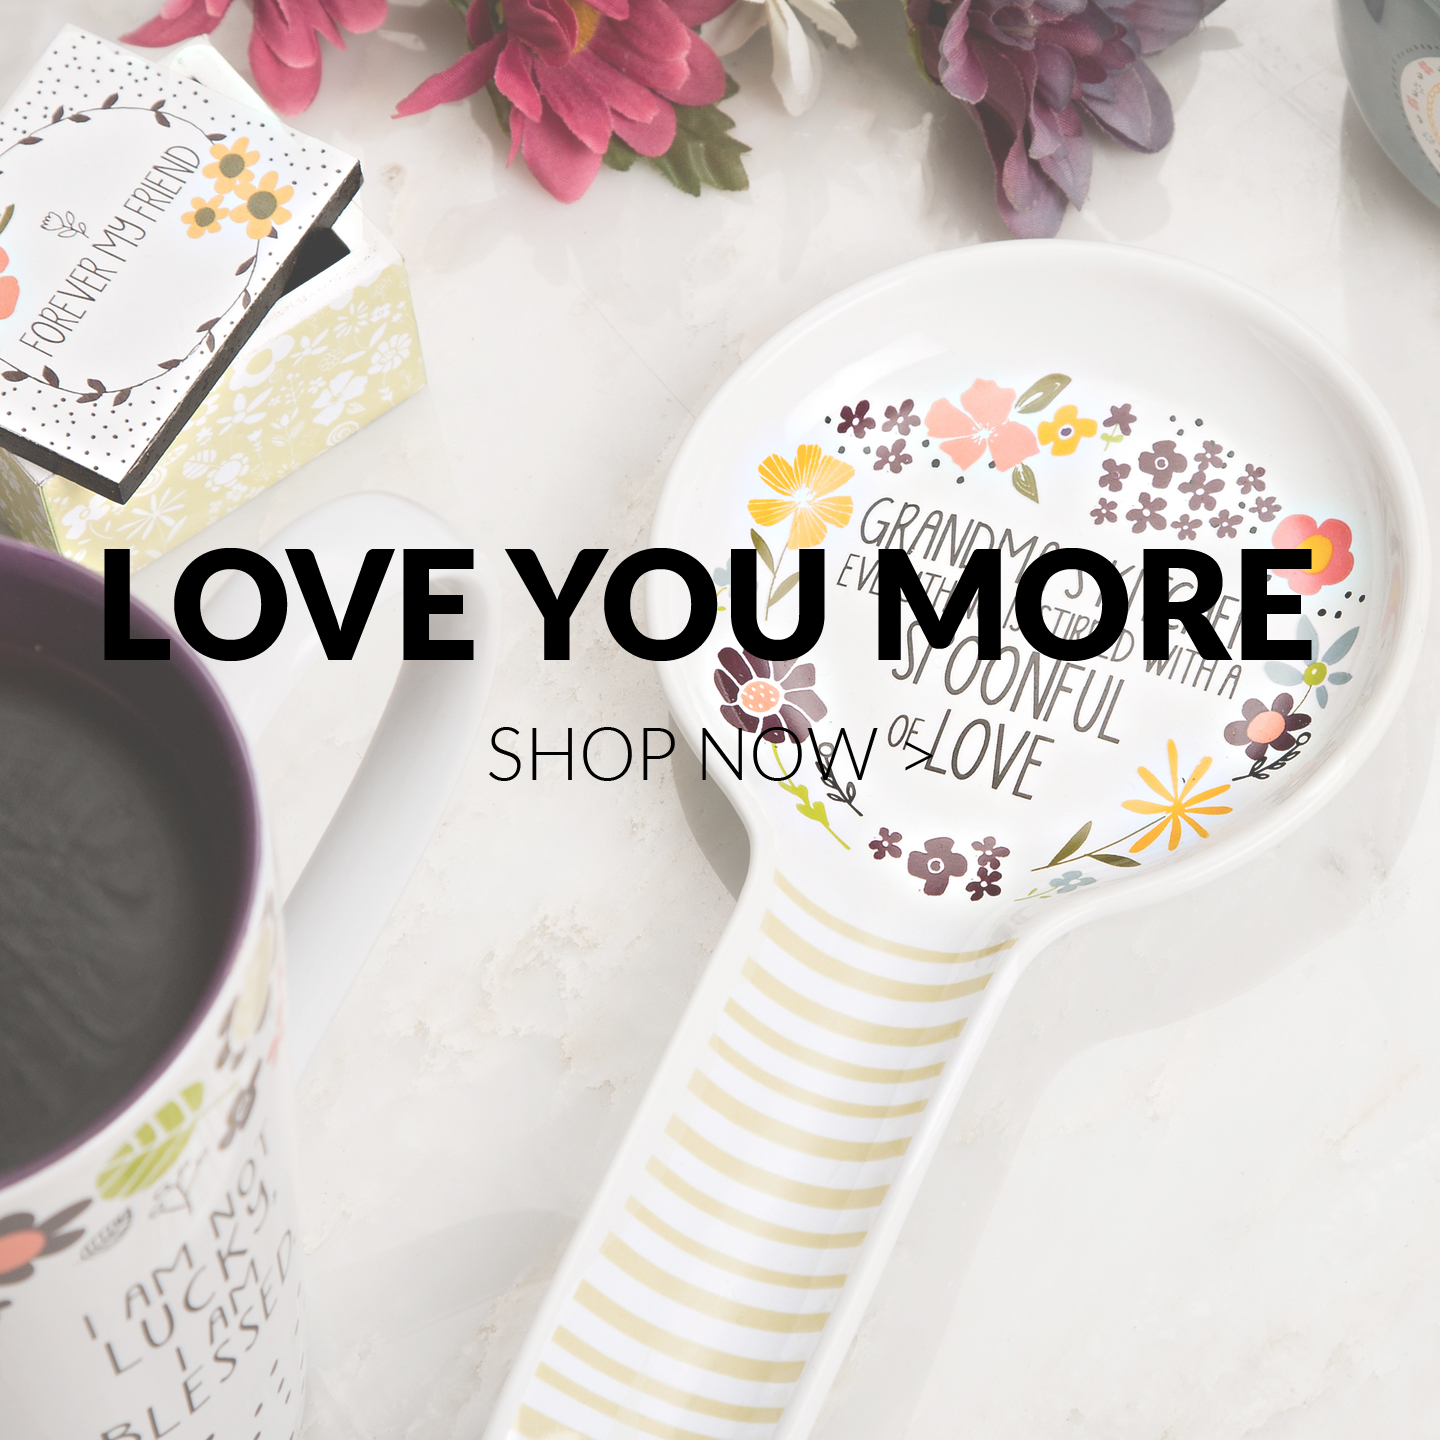 Love You More by Amylee Weeks